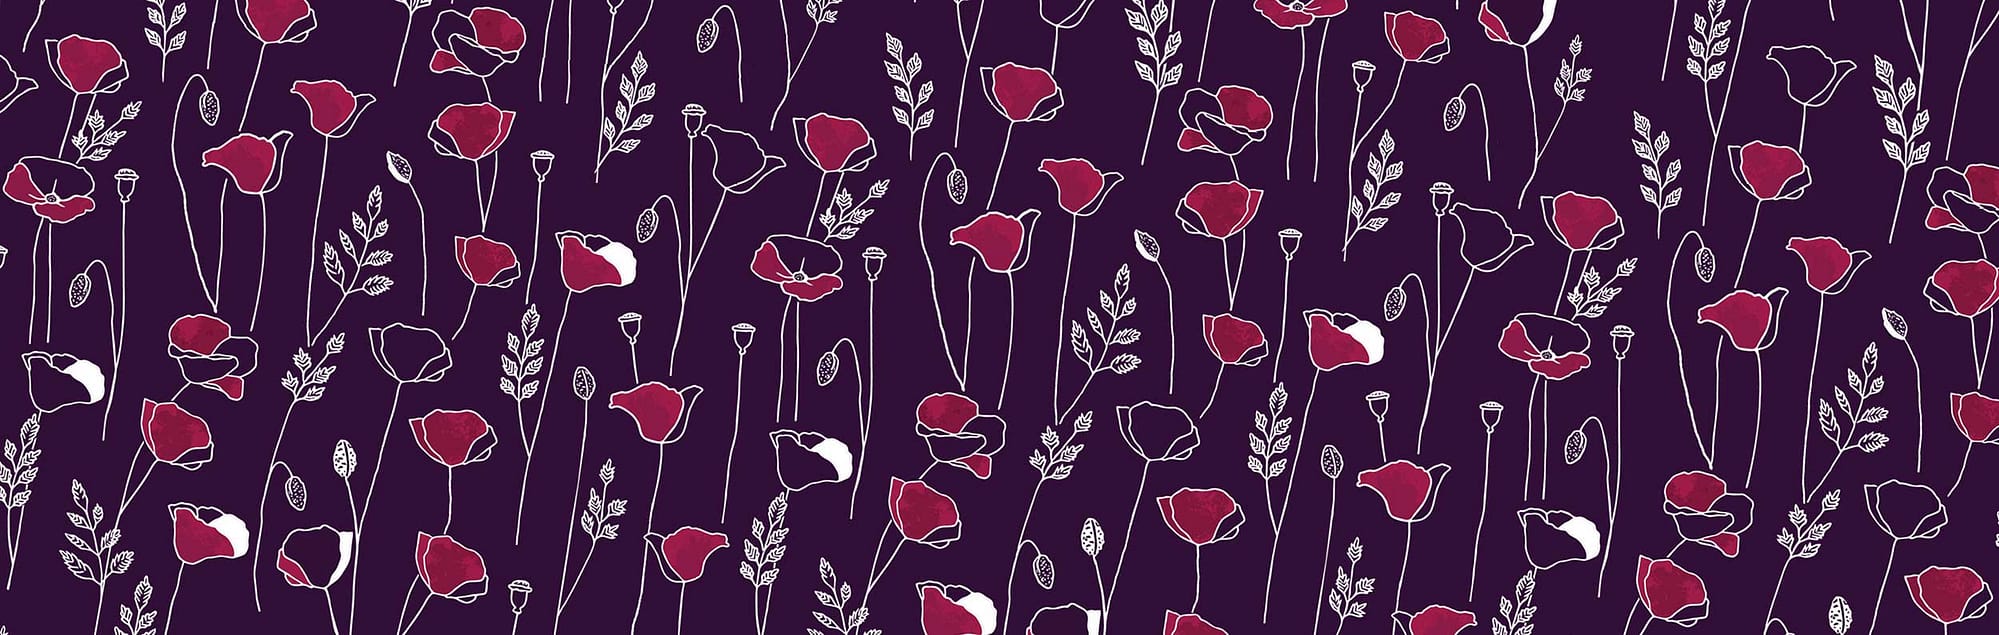 seamless pattern design with poppies